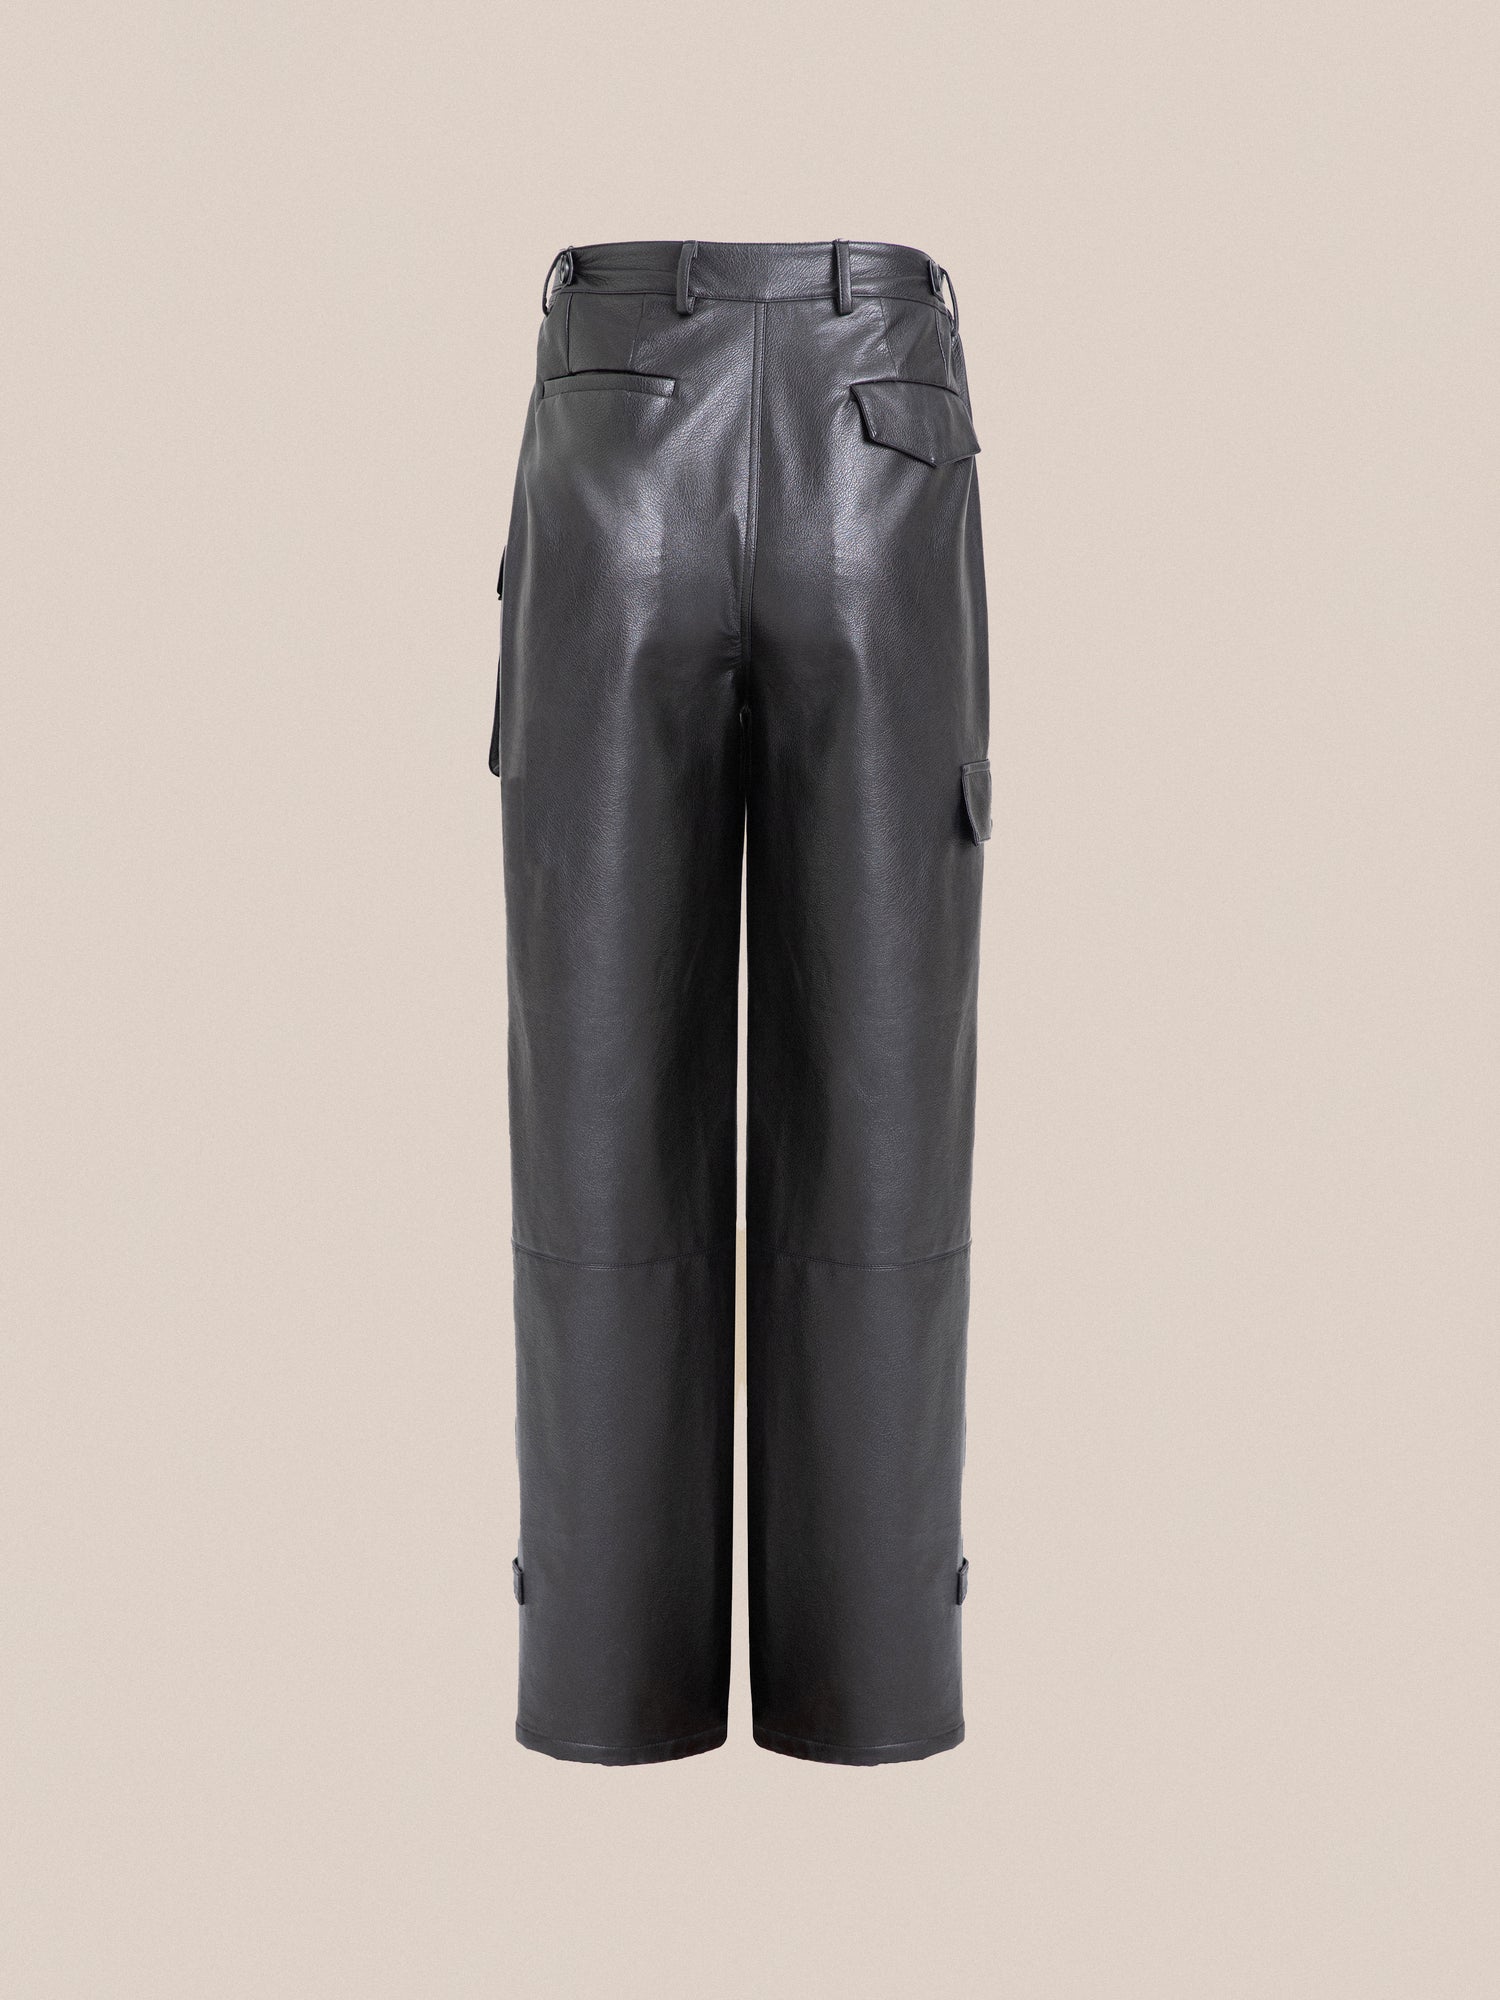 A pair of black Found faux leather cargo pants with cargo pockets.